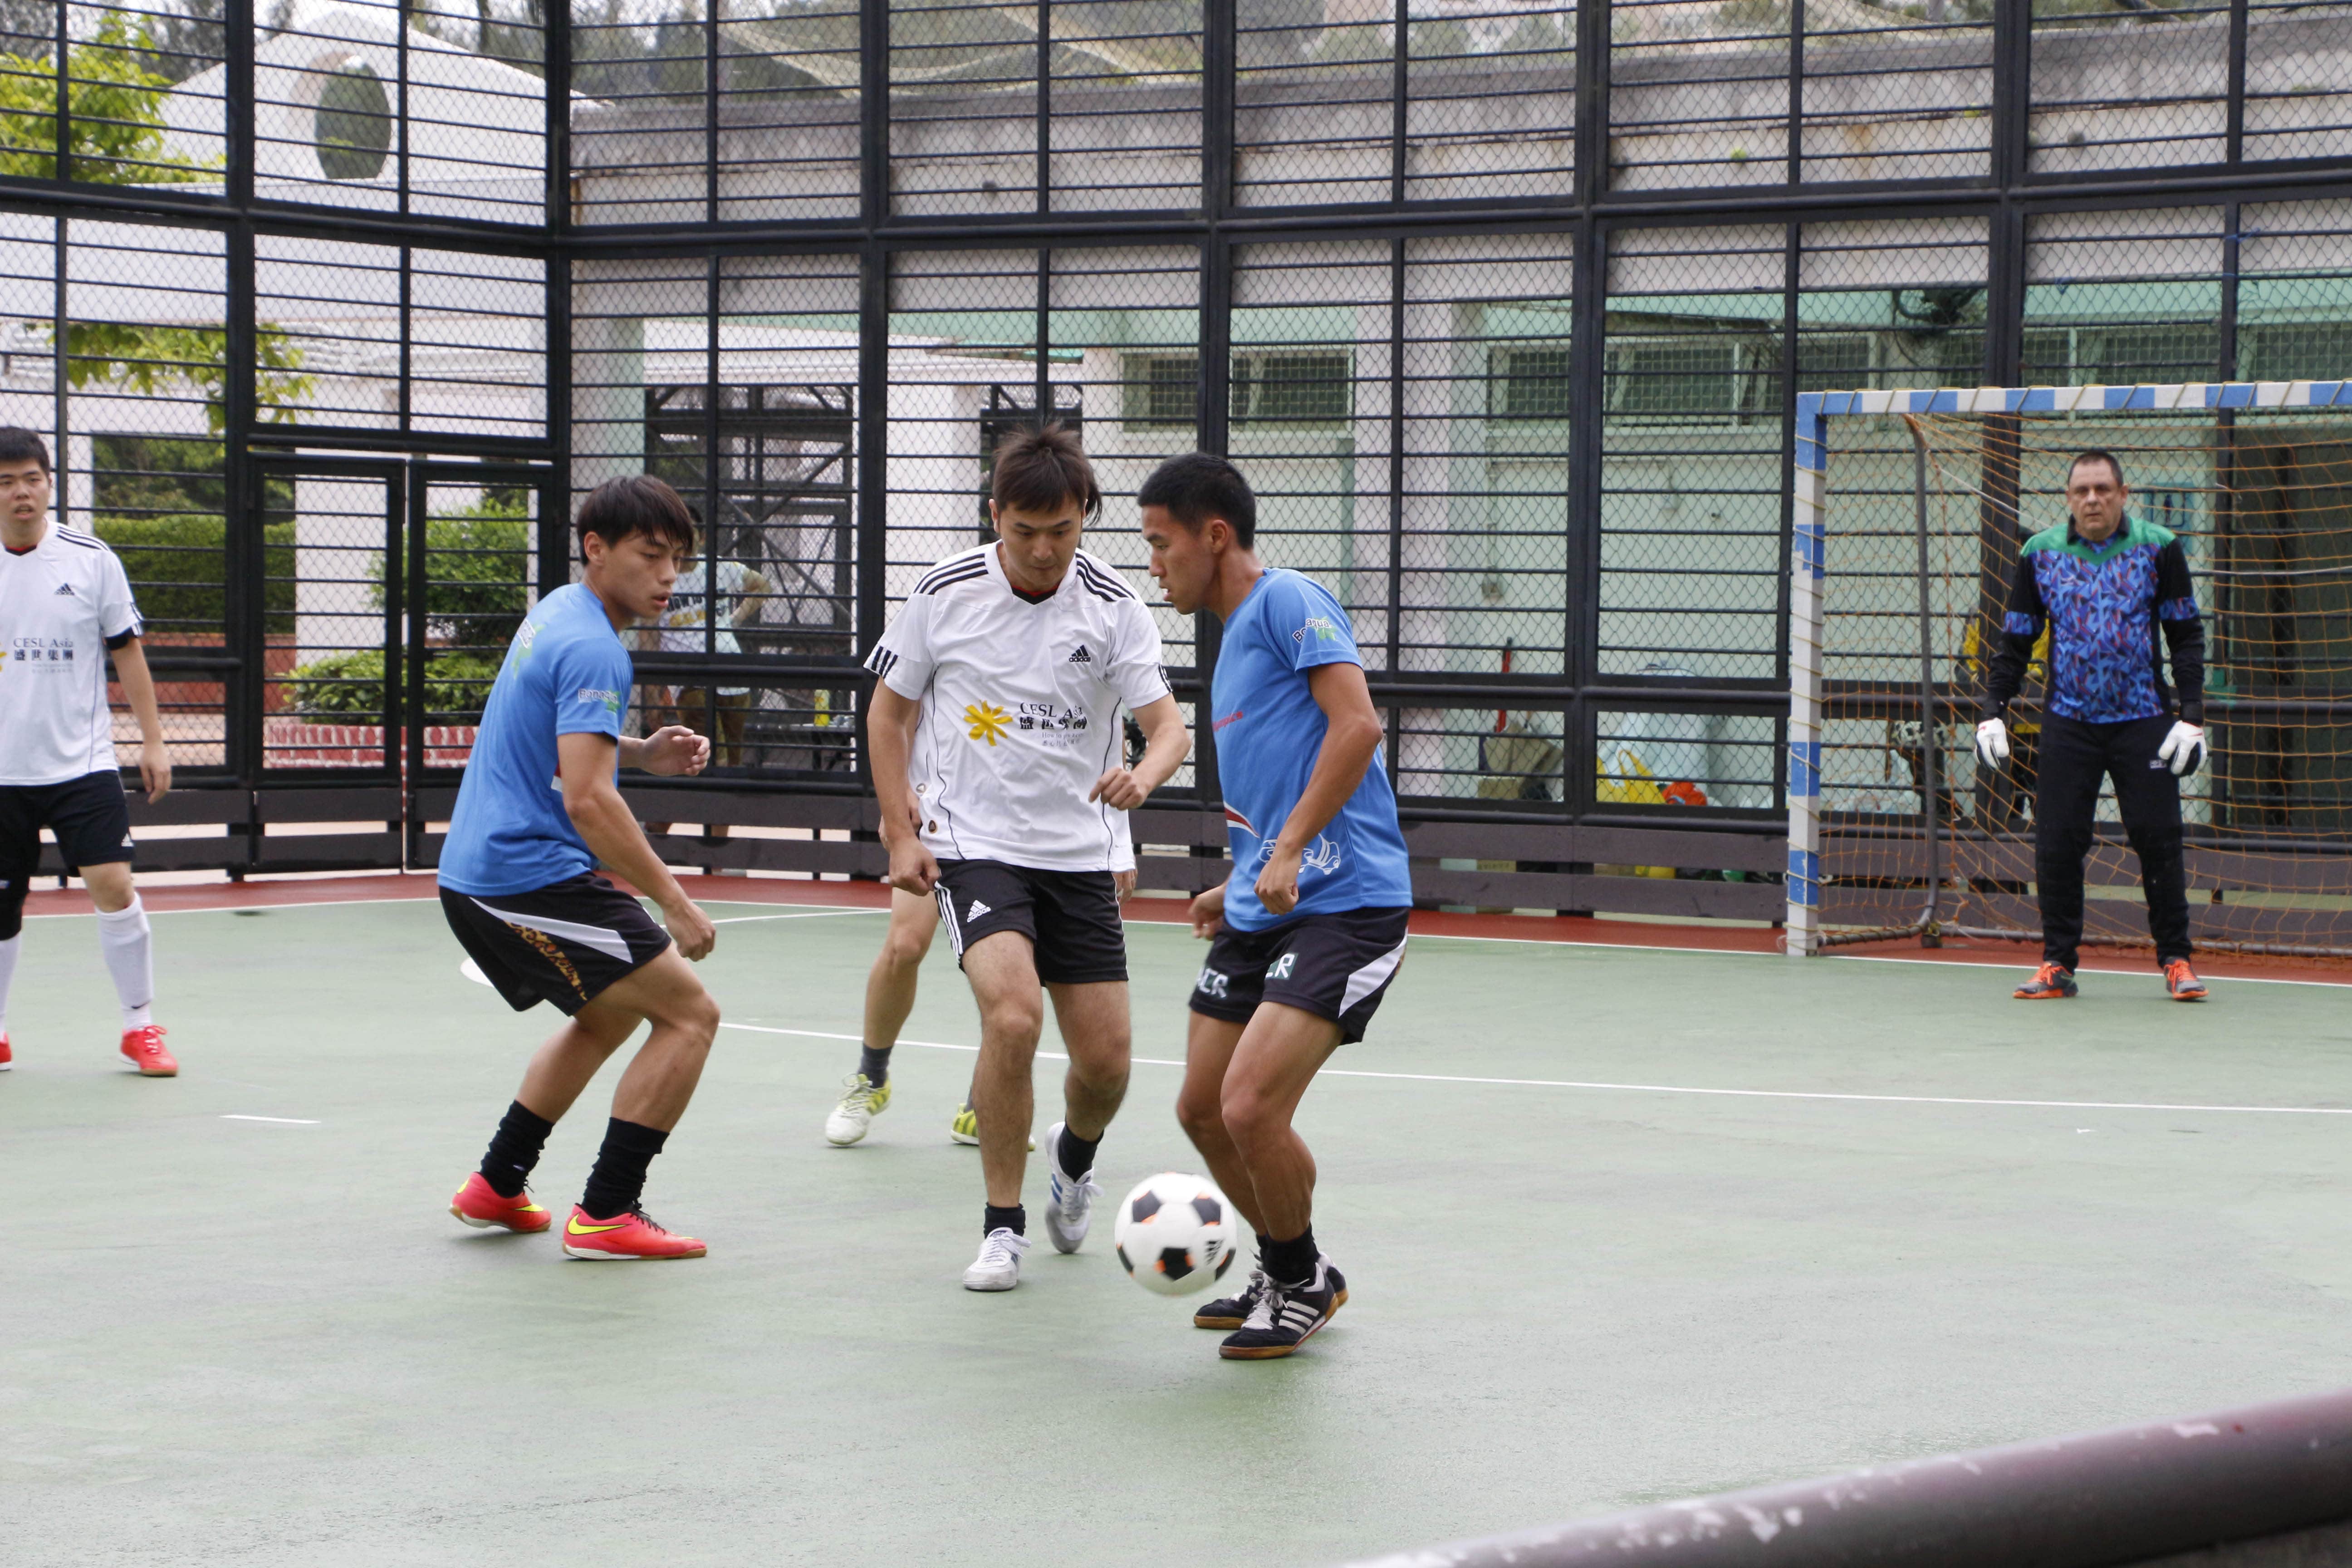 CESL Asia held Charity Football Tournament to raise funds for Macau Special Olympics